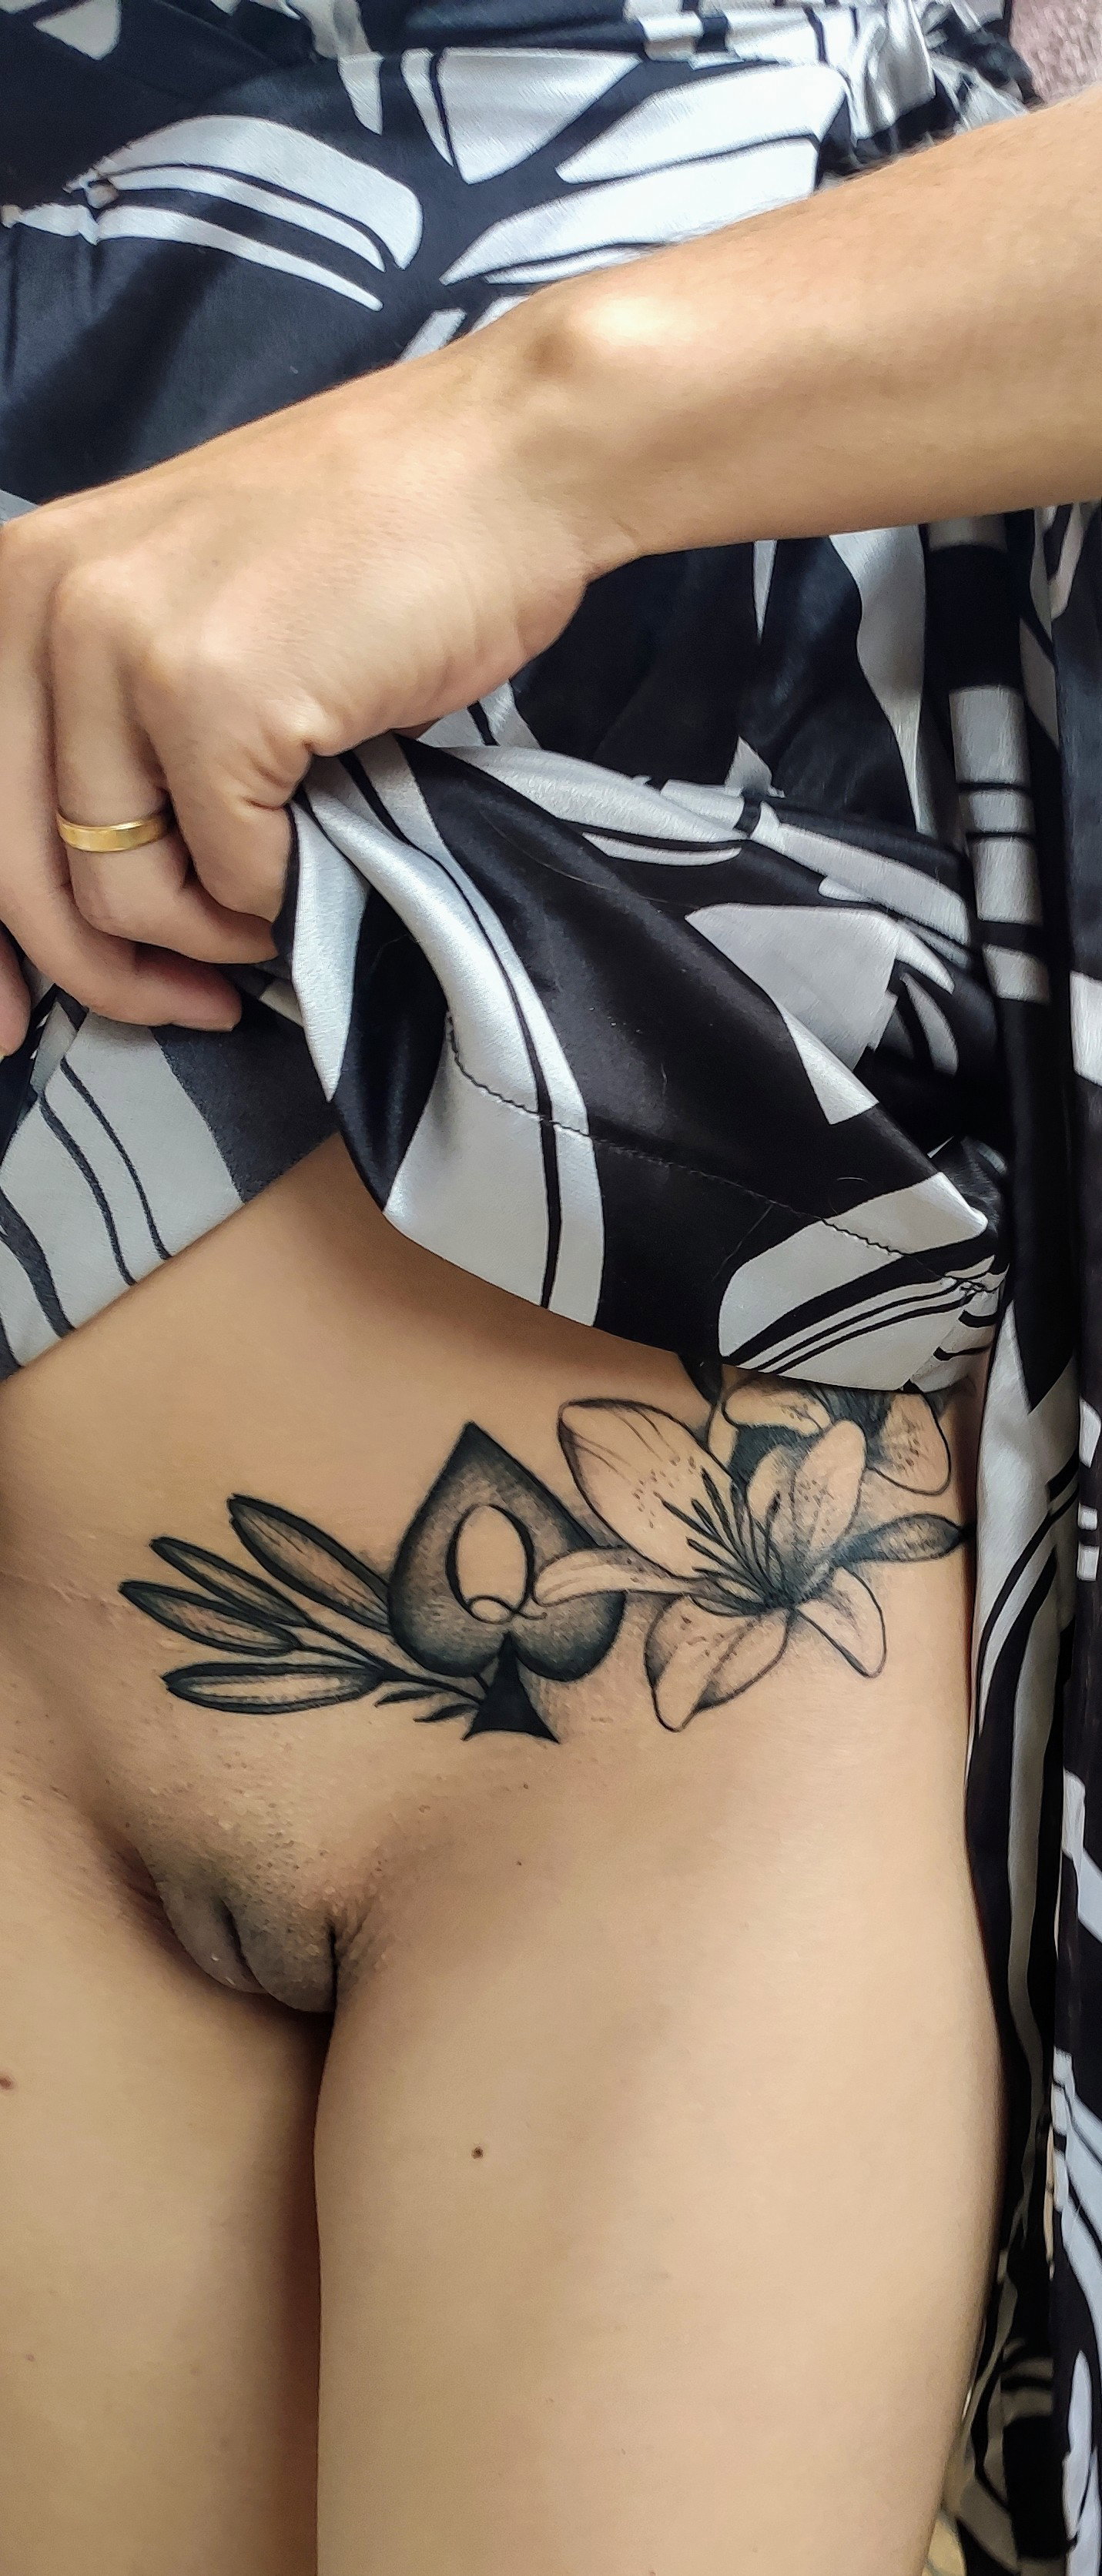 Photo by Lettywild with the username @LettyWild, who is a star user,  November 17, 2019 at 6:58 PM. The post is about the topic Hotwives and the text says '#queenofspades #lettywild #ksalsafadomg #ink #tattoo'